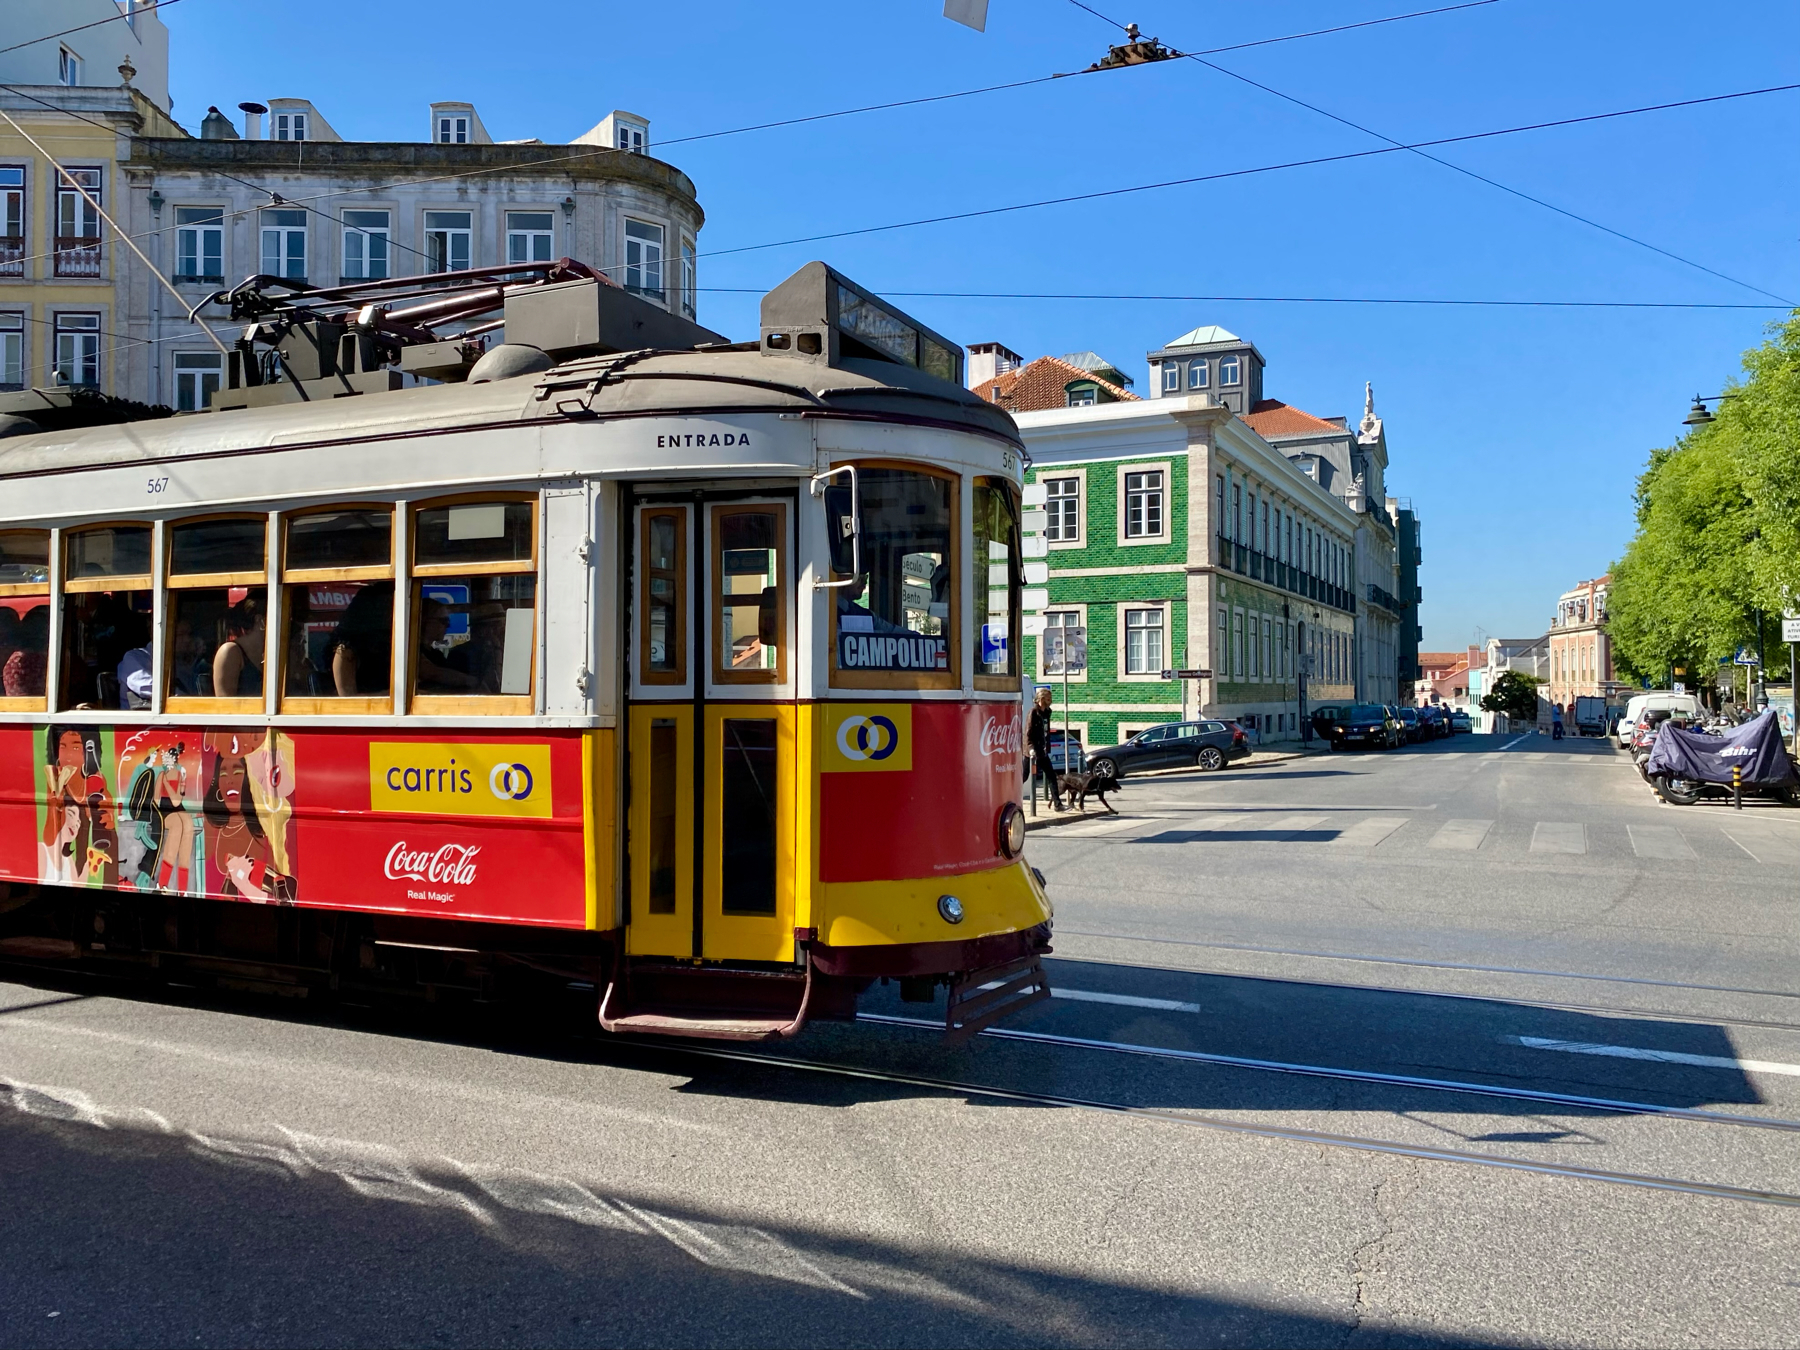 A vintage yellow and red tram with a Coca-Cola advertisement on its side travels on a street in a sunny urban setting with classic European architecture.